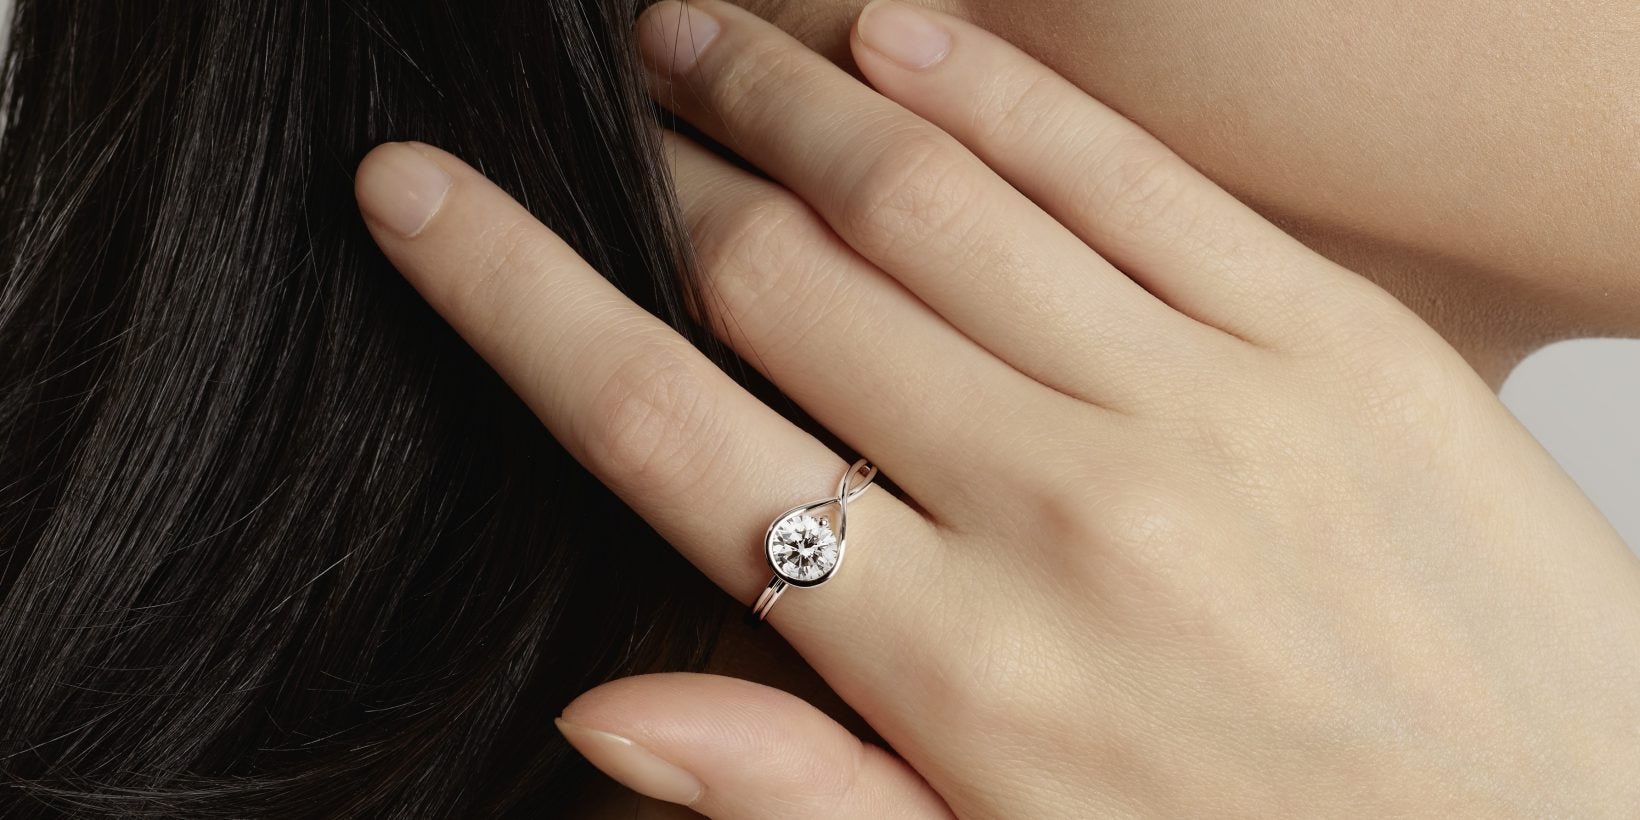 Pandora, the world’s largest jewellery brand, invests in lab-grown diamonds